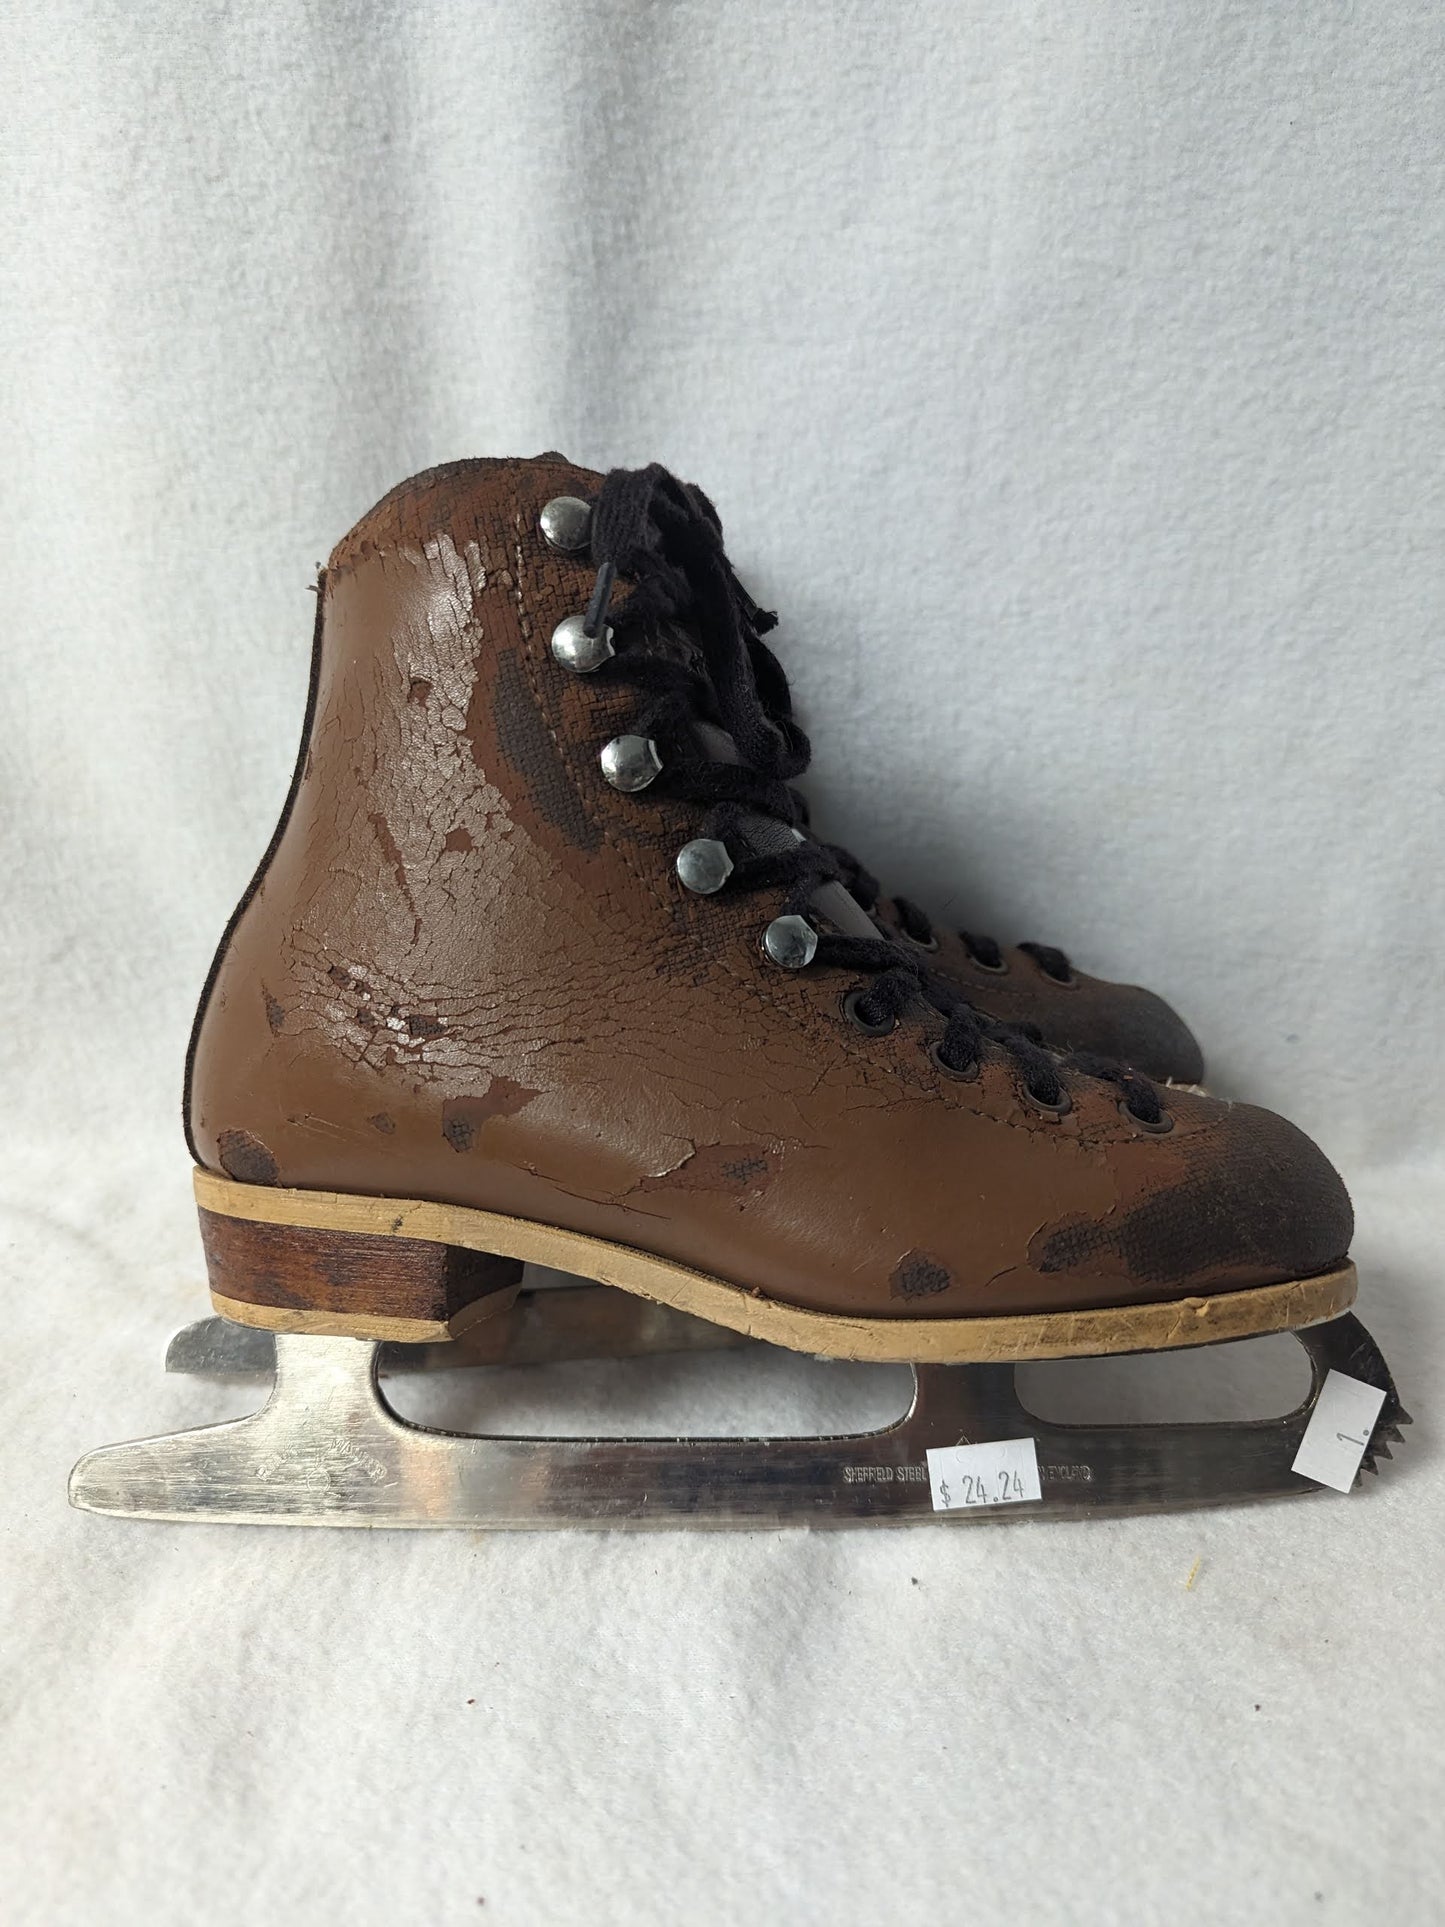 Rink Master Ice Skates Size 1 Color Brown Condition Used